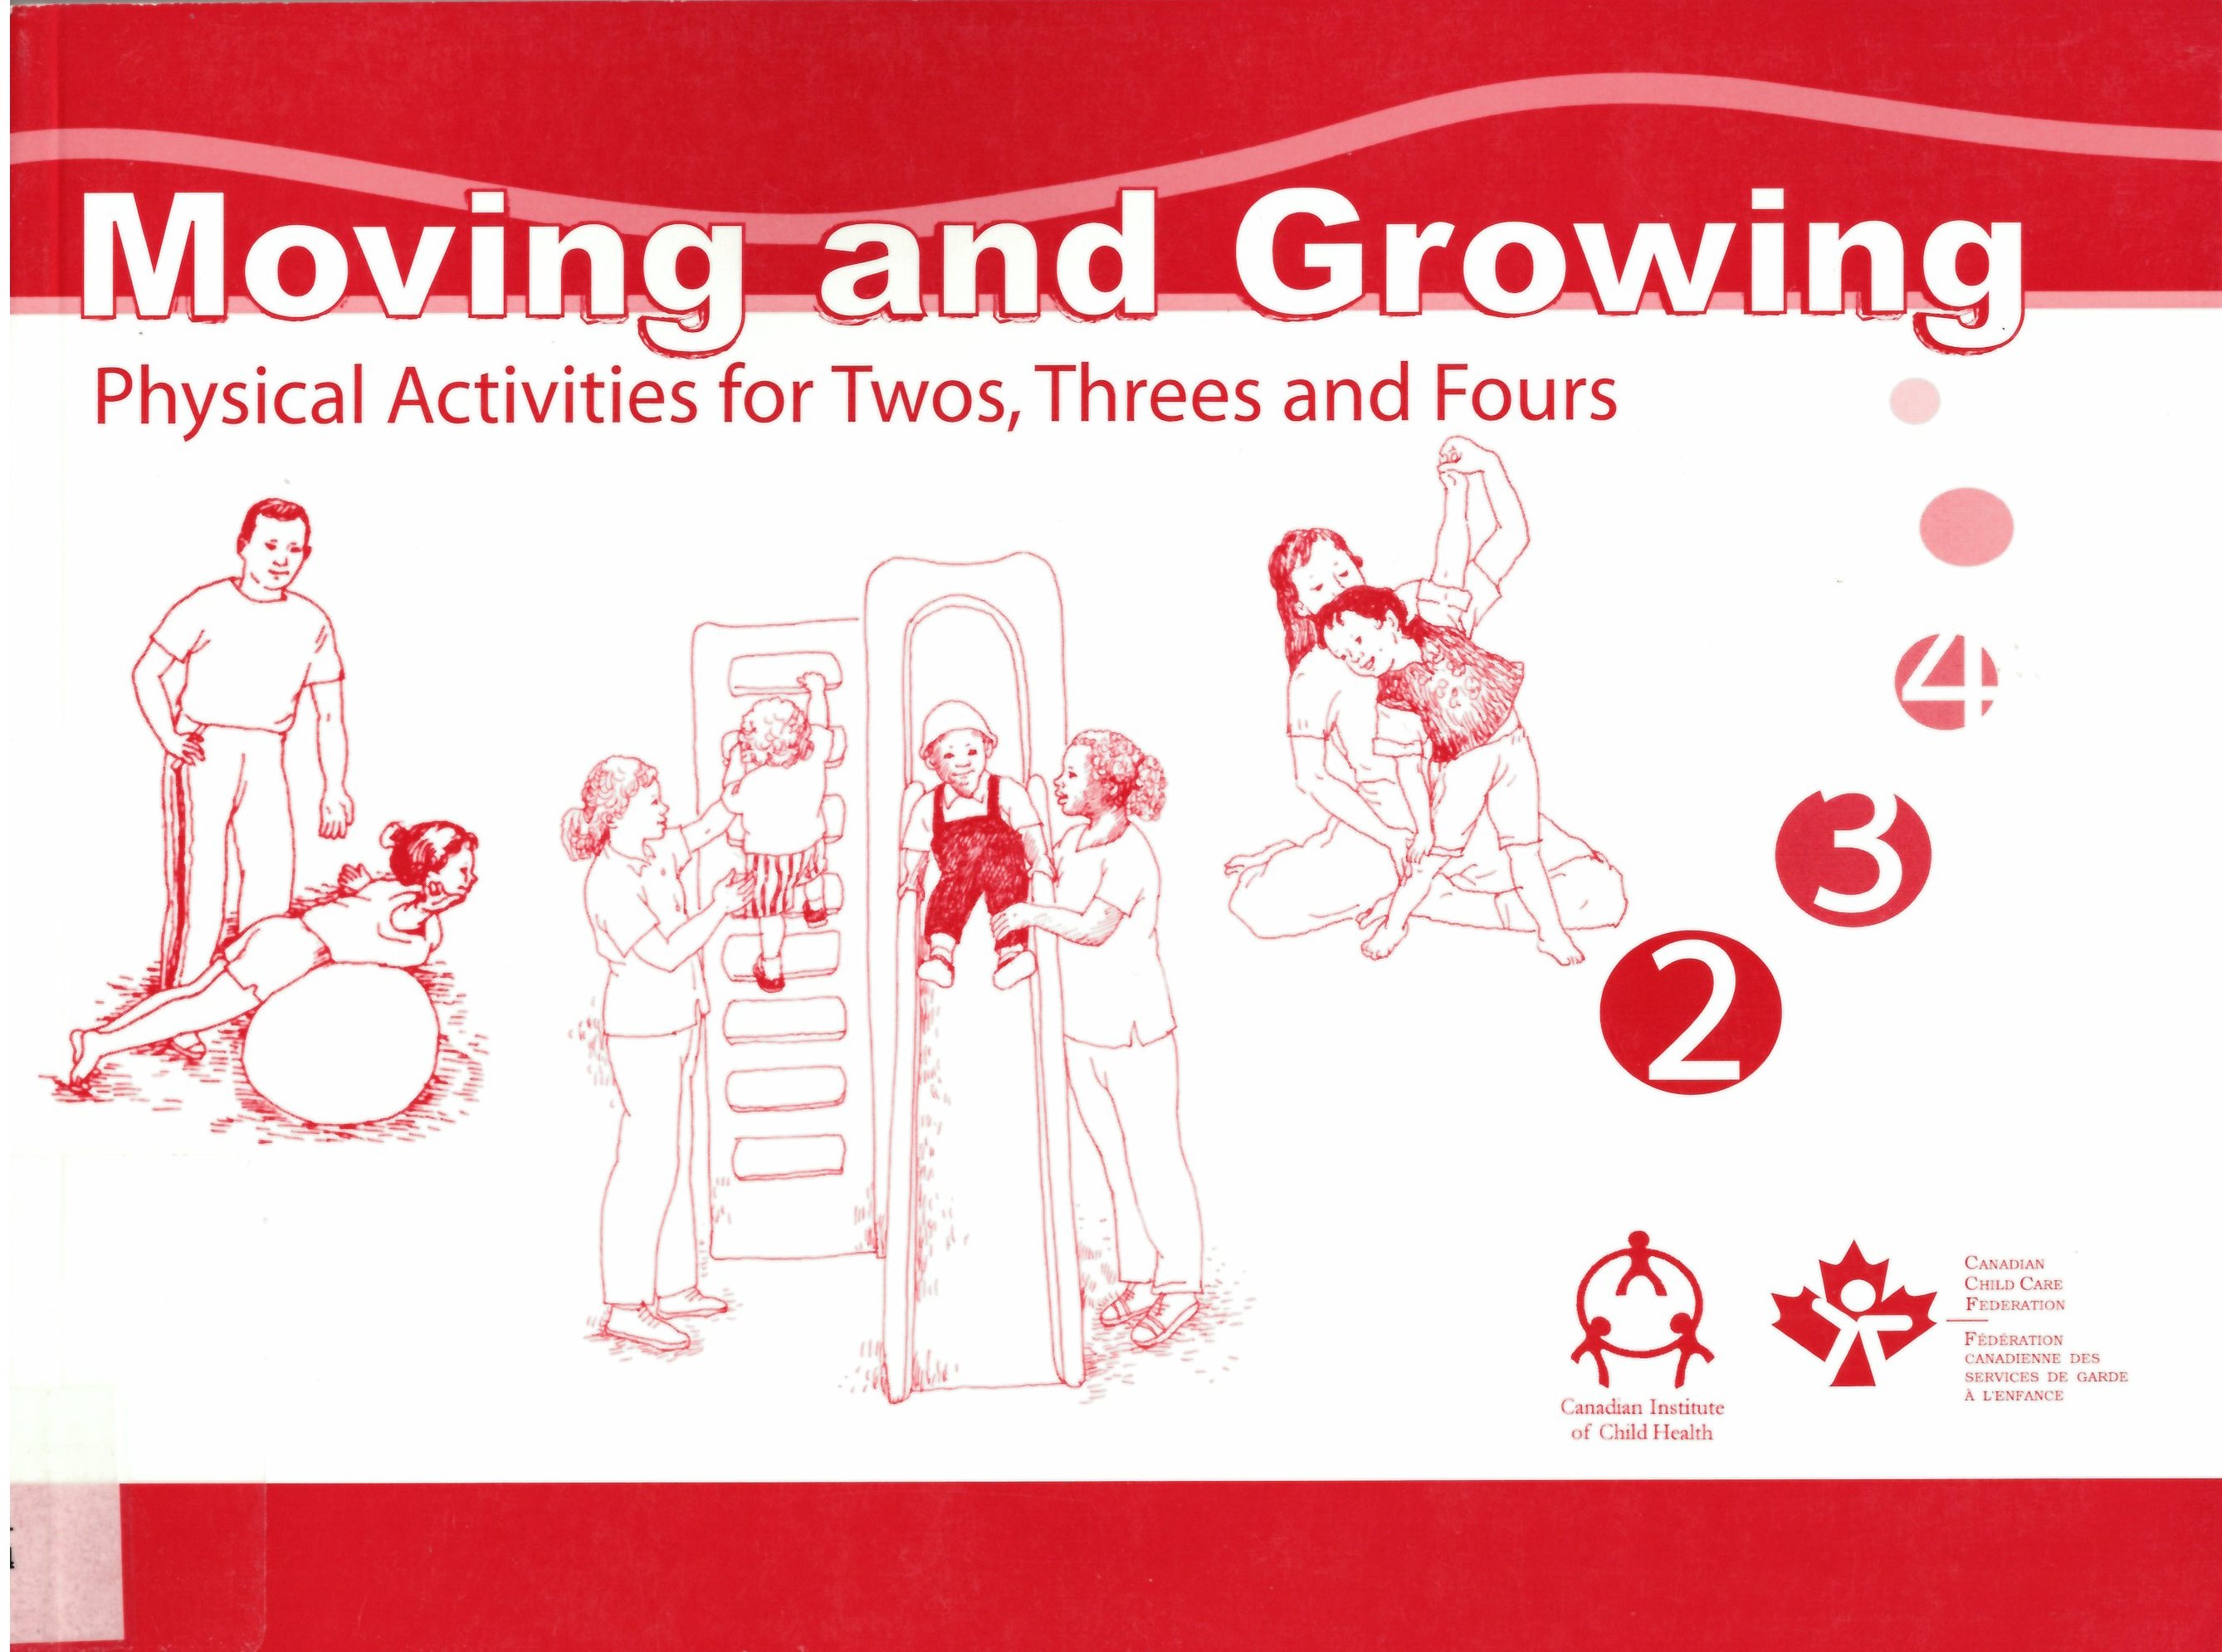 Moving and growing 2 : Physical activities for twos, threes and fours